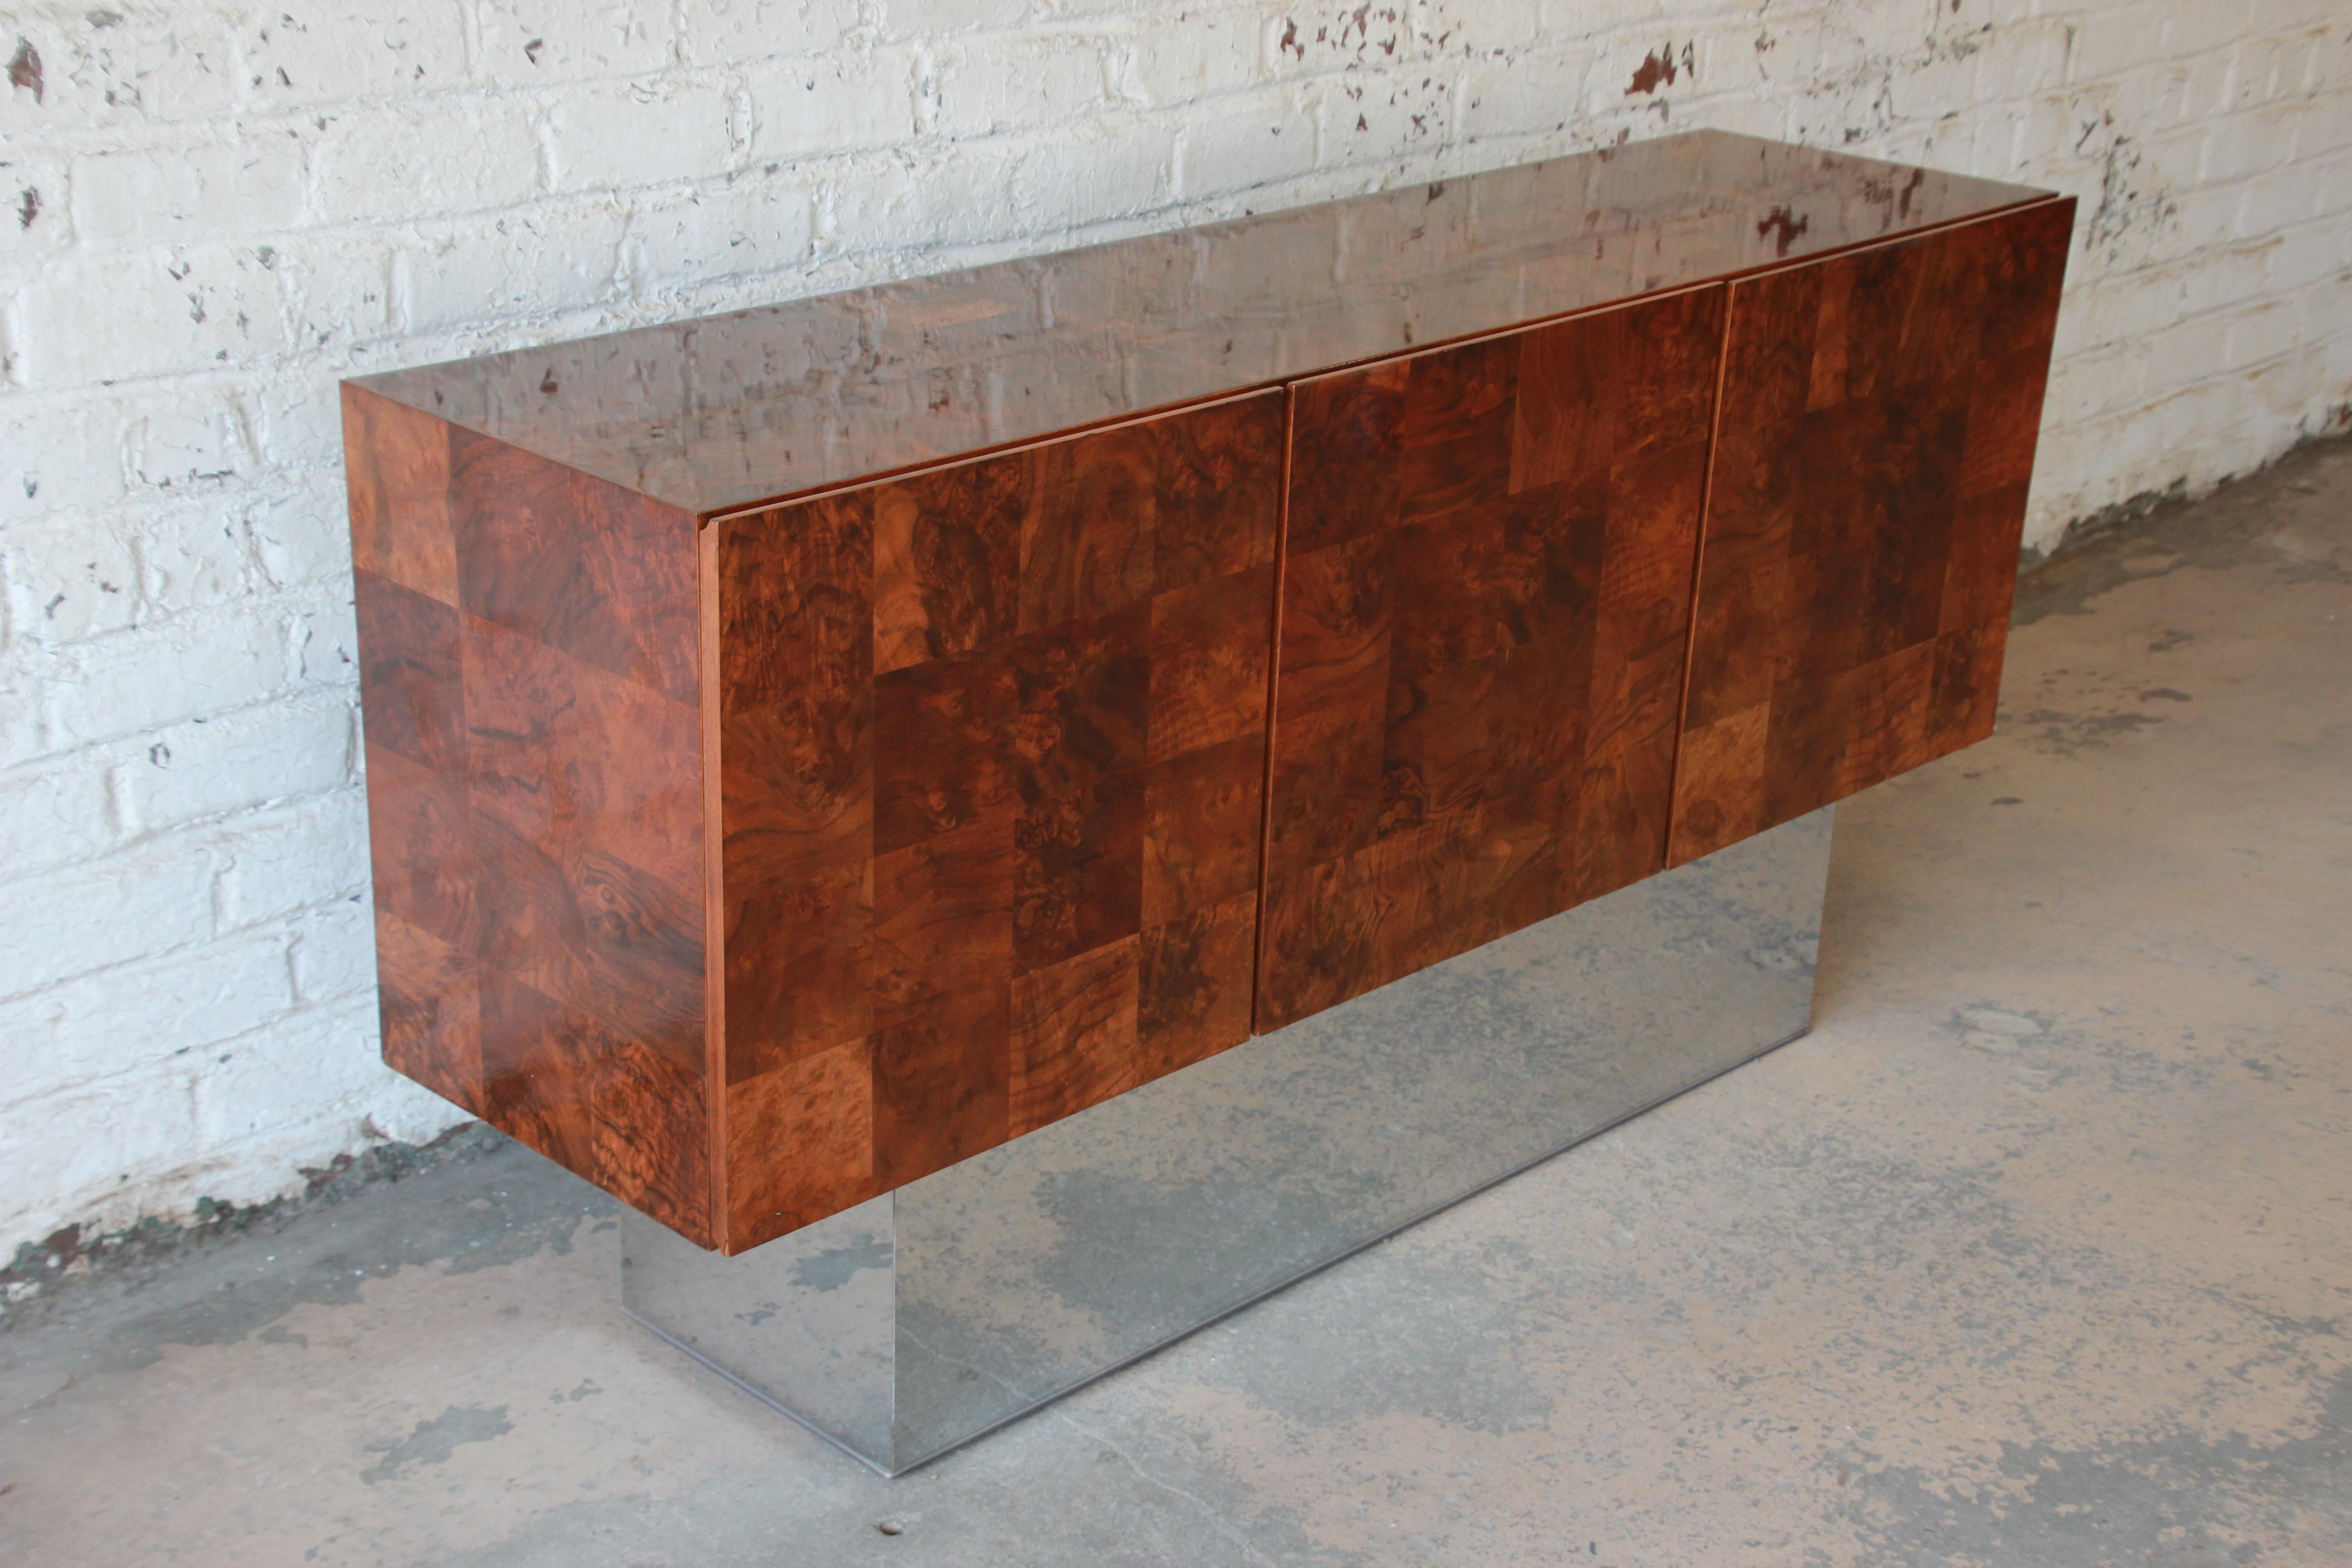 An exceptional Mid-Century Modern patchwork burl wood and chrome sideboard credenza designed by Milo Baughman. The credenza features stunning burled walnut wood grain and a sleek, tall chrome plinth base. It offers ample room for storage, with four